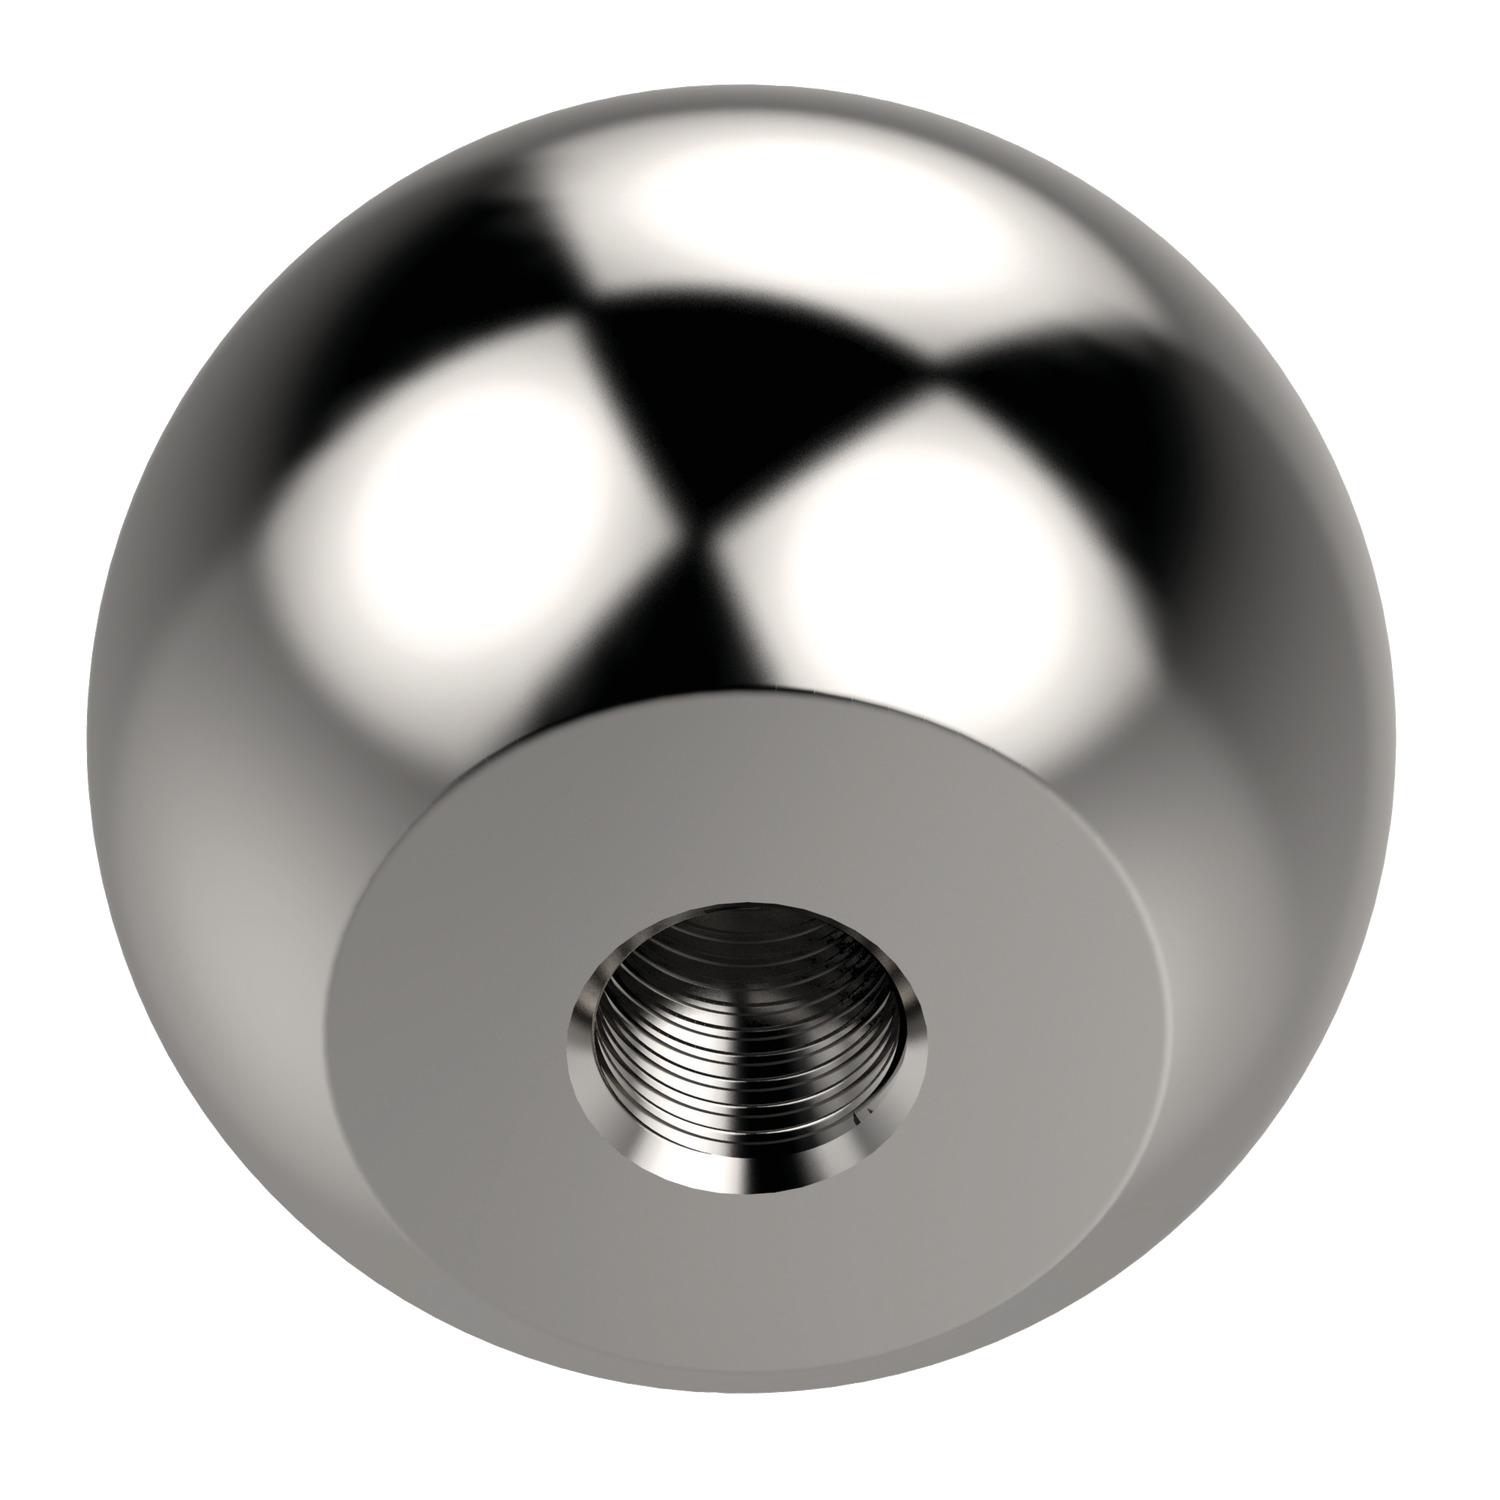 73004 Ball Knobs - Stainless Steel